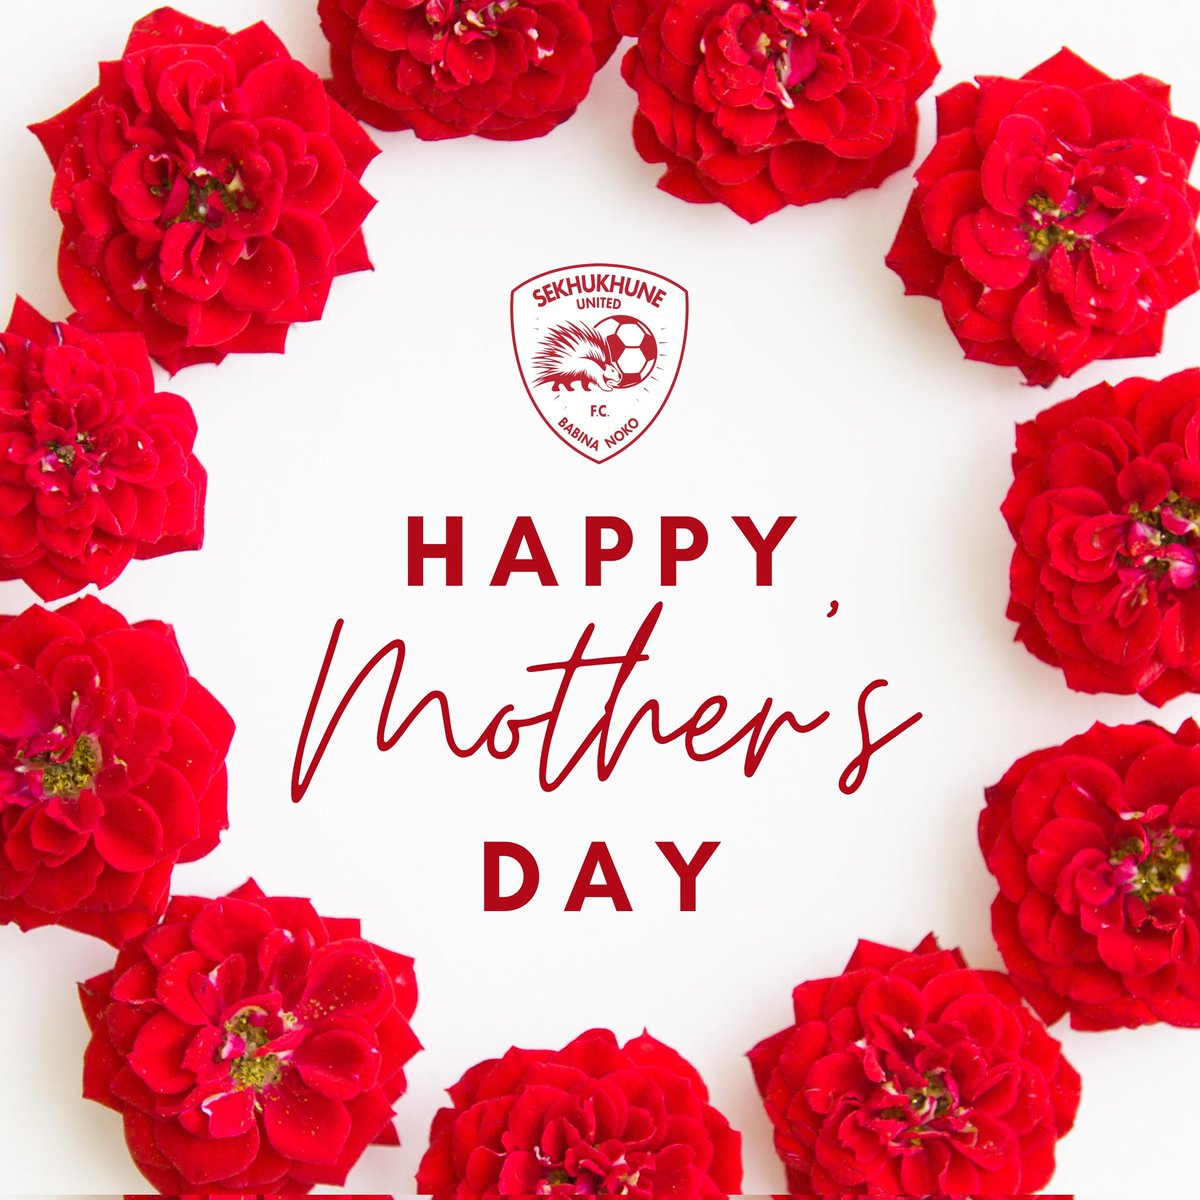 *HAPPY MOTHERS DAY* Today is a special occasion to honor and appreciate remarkable women who play vital roles in our lives, showing immense love and making sacrifices. To all the mothers out there “We Love and Appreciate You” 🦔🦔🦔 #Adibahlabe #HappyMothersDay2024